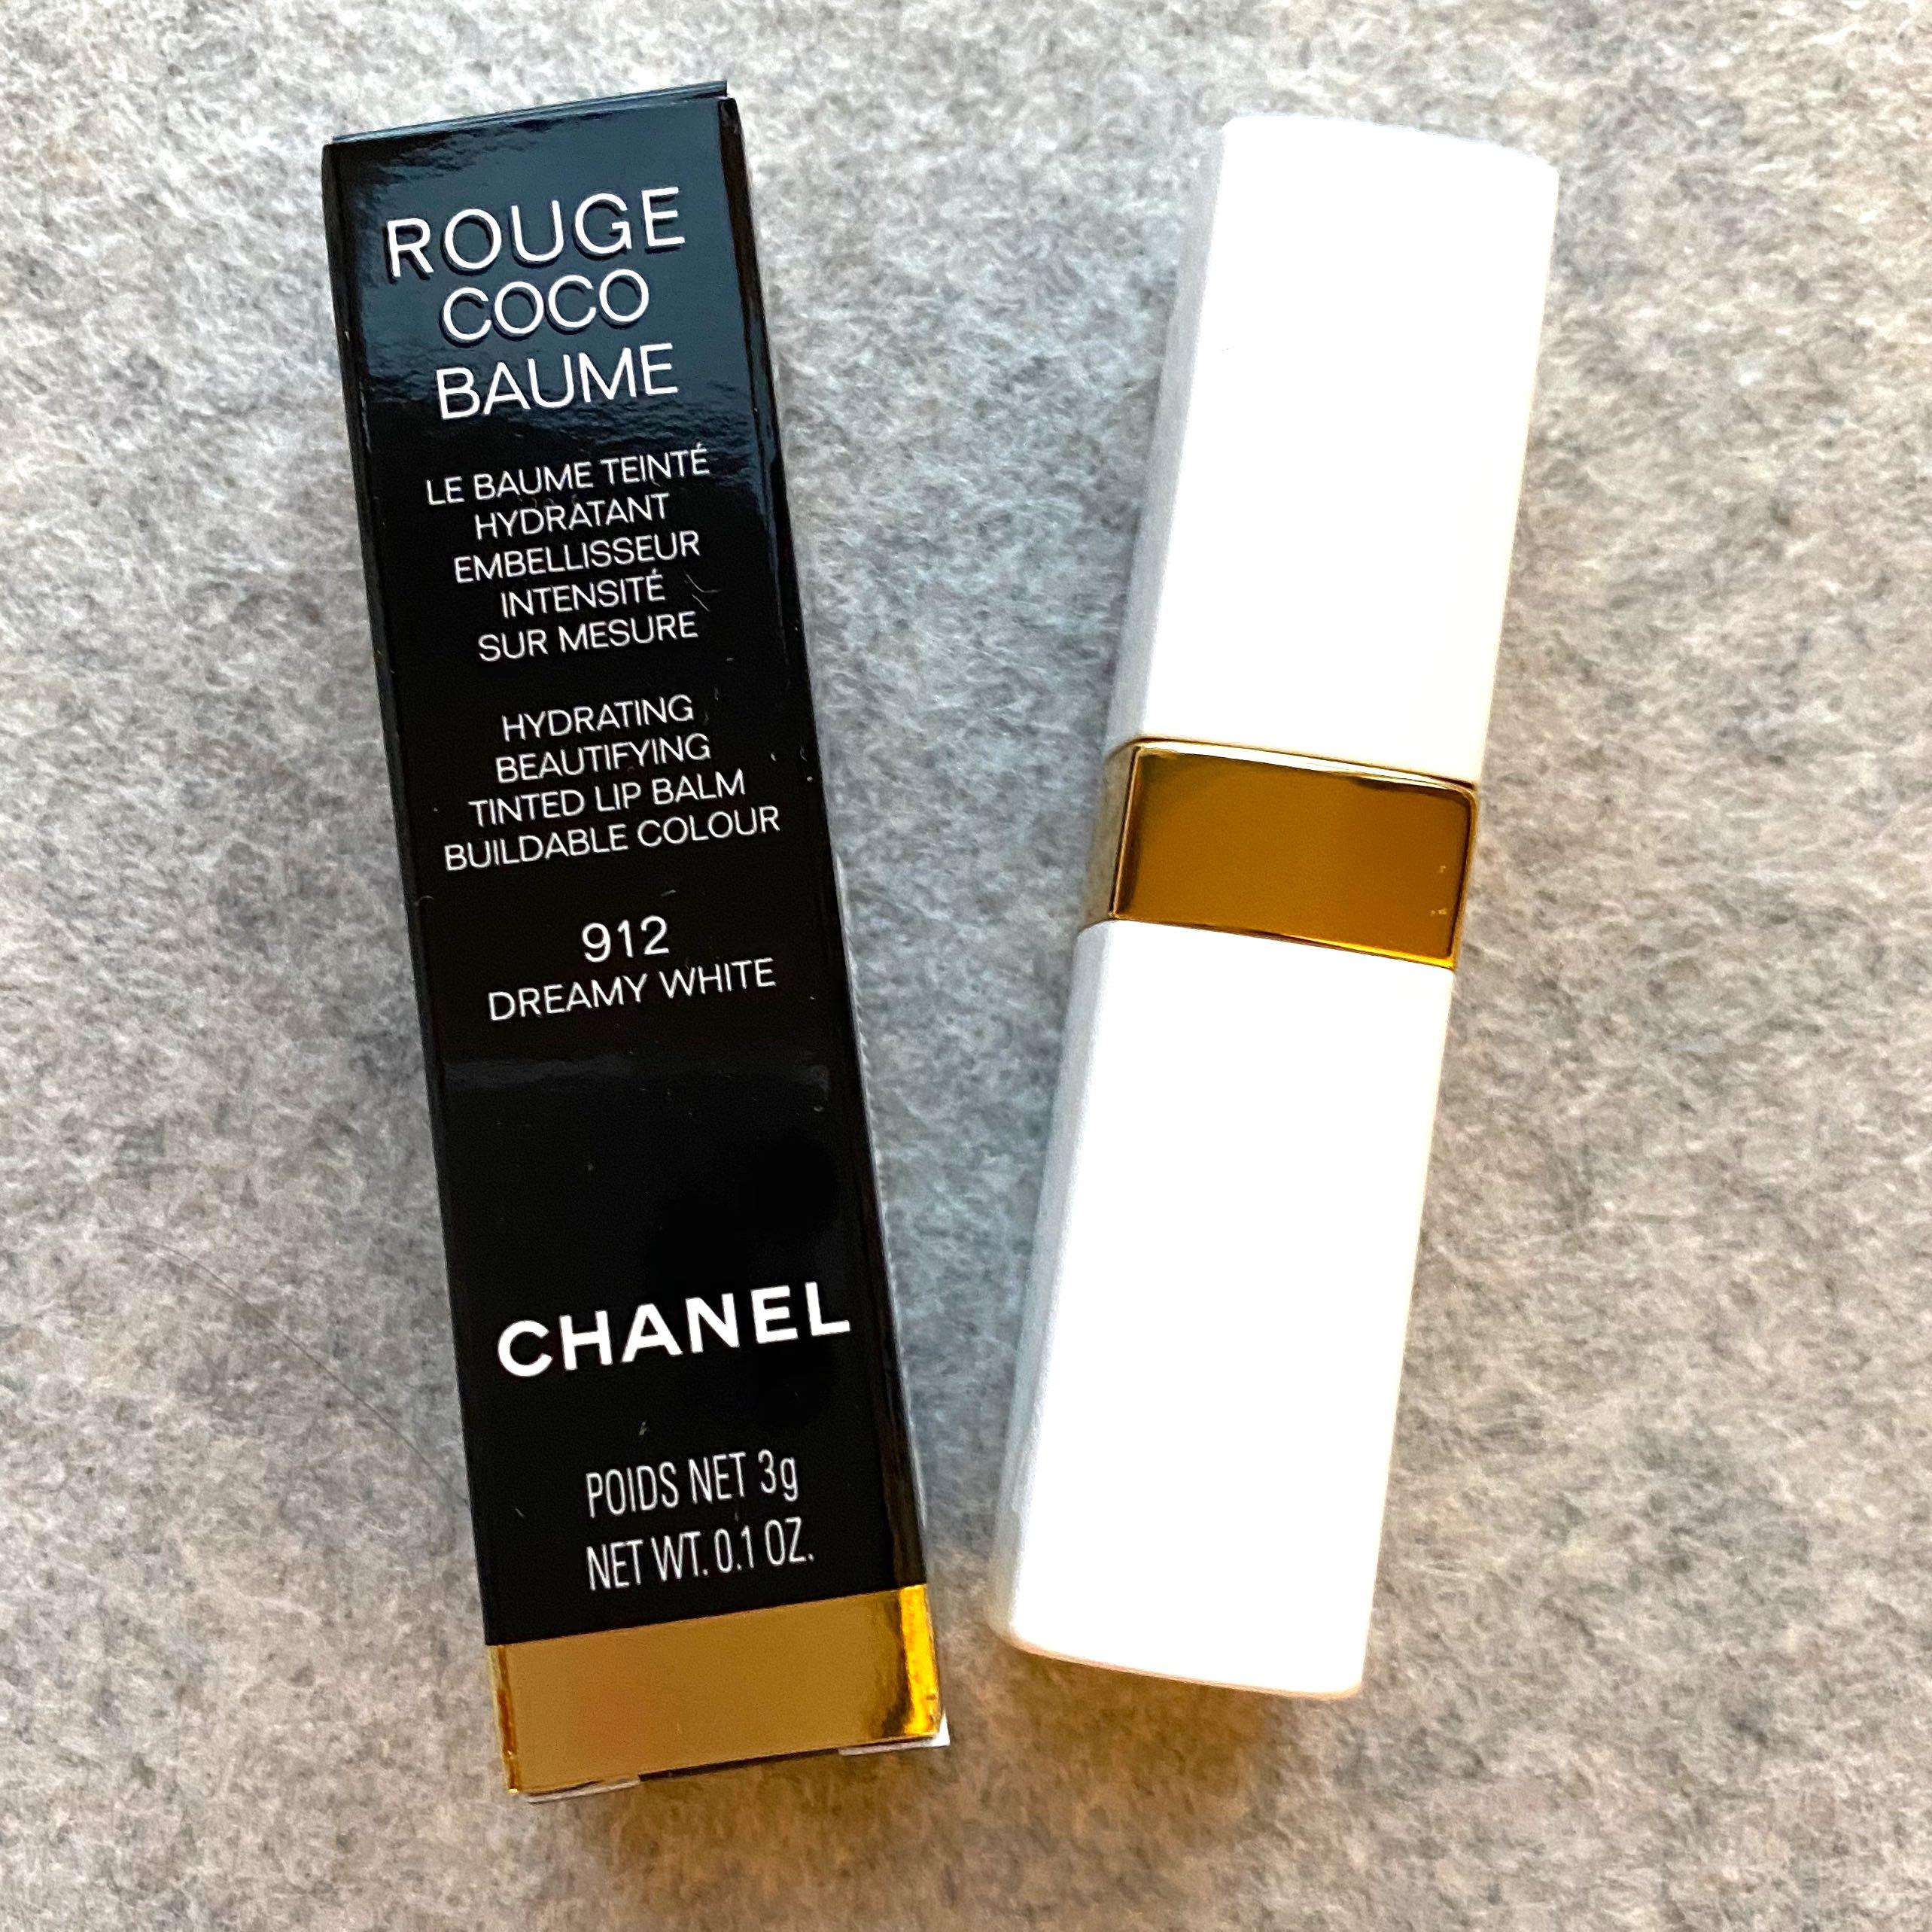 CHANEL Hydrating Tinted Lip Balm That Offers Buildable Colour For  Better-Looking Lips, Day After Day